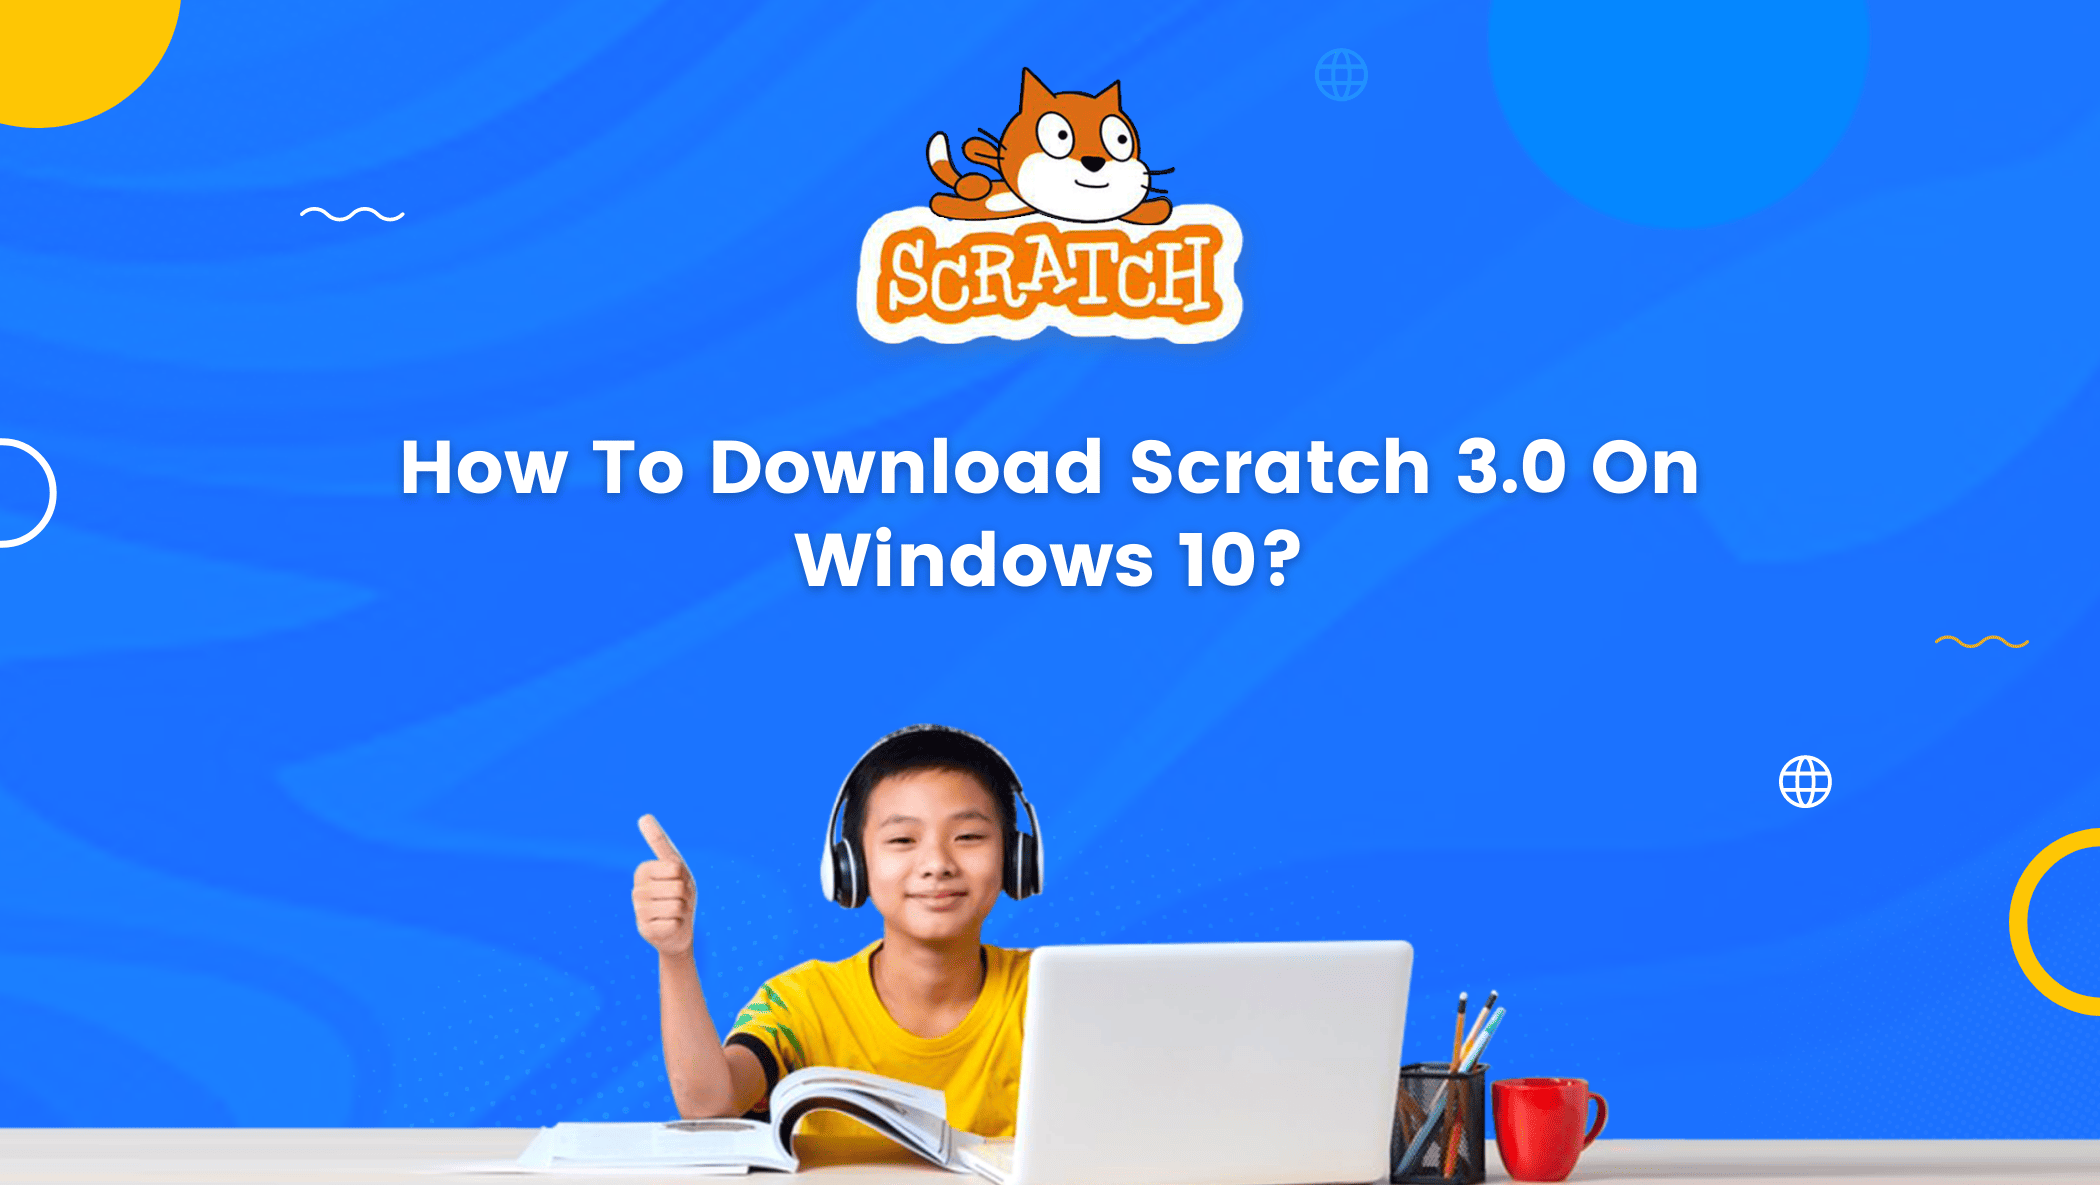 How To Download Scratch 3.0 On Windows 10